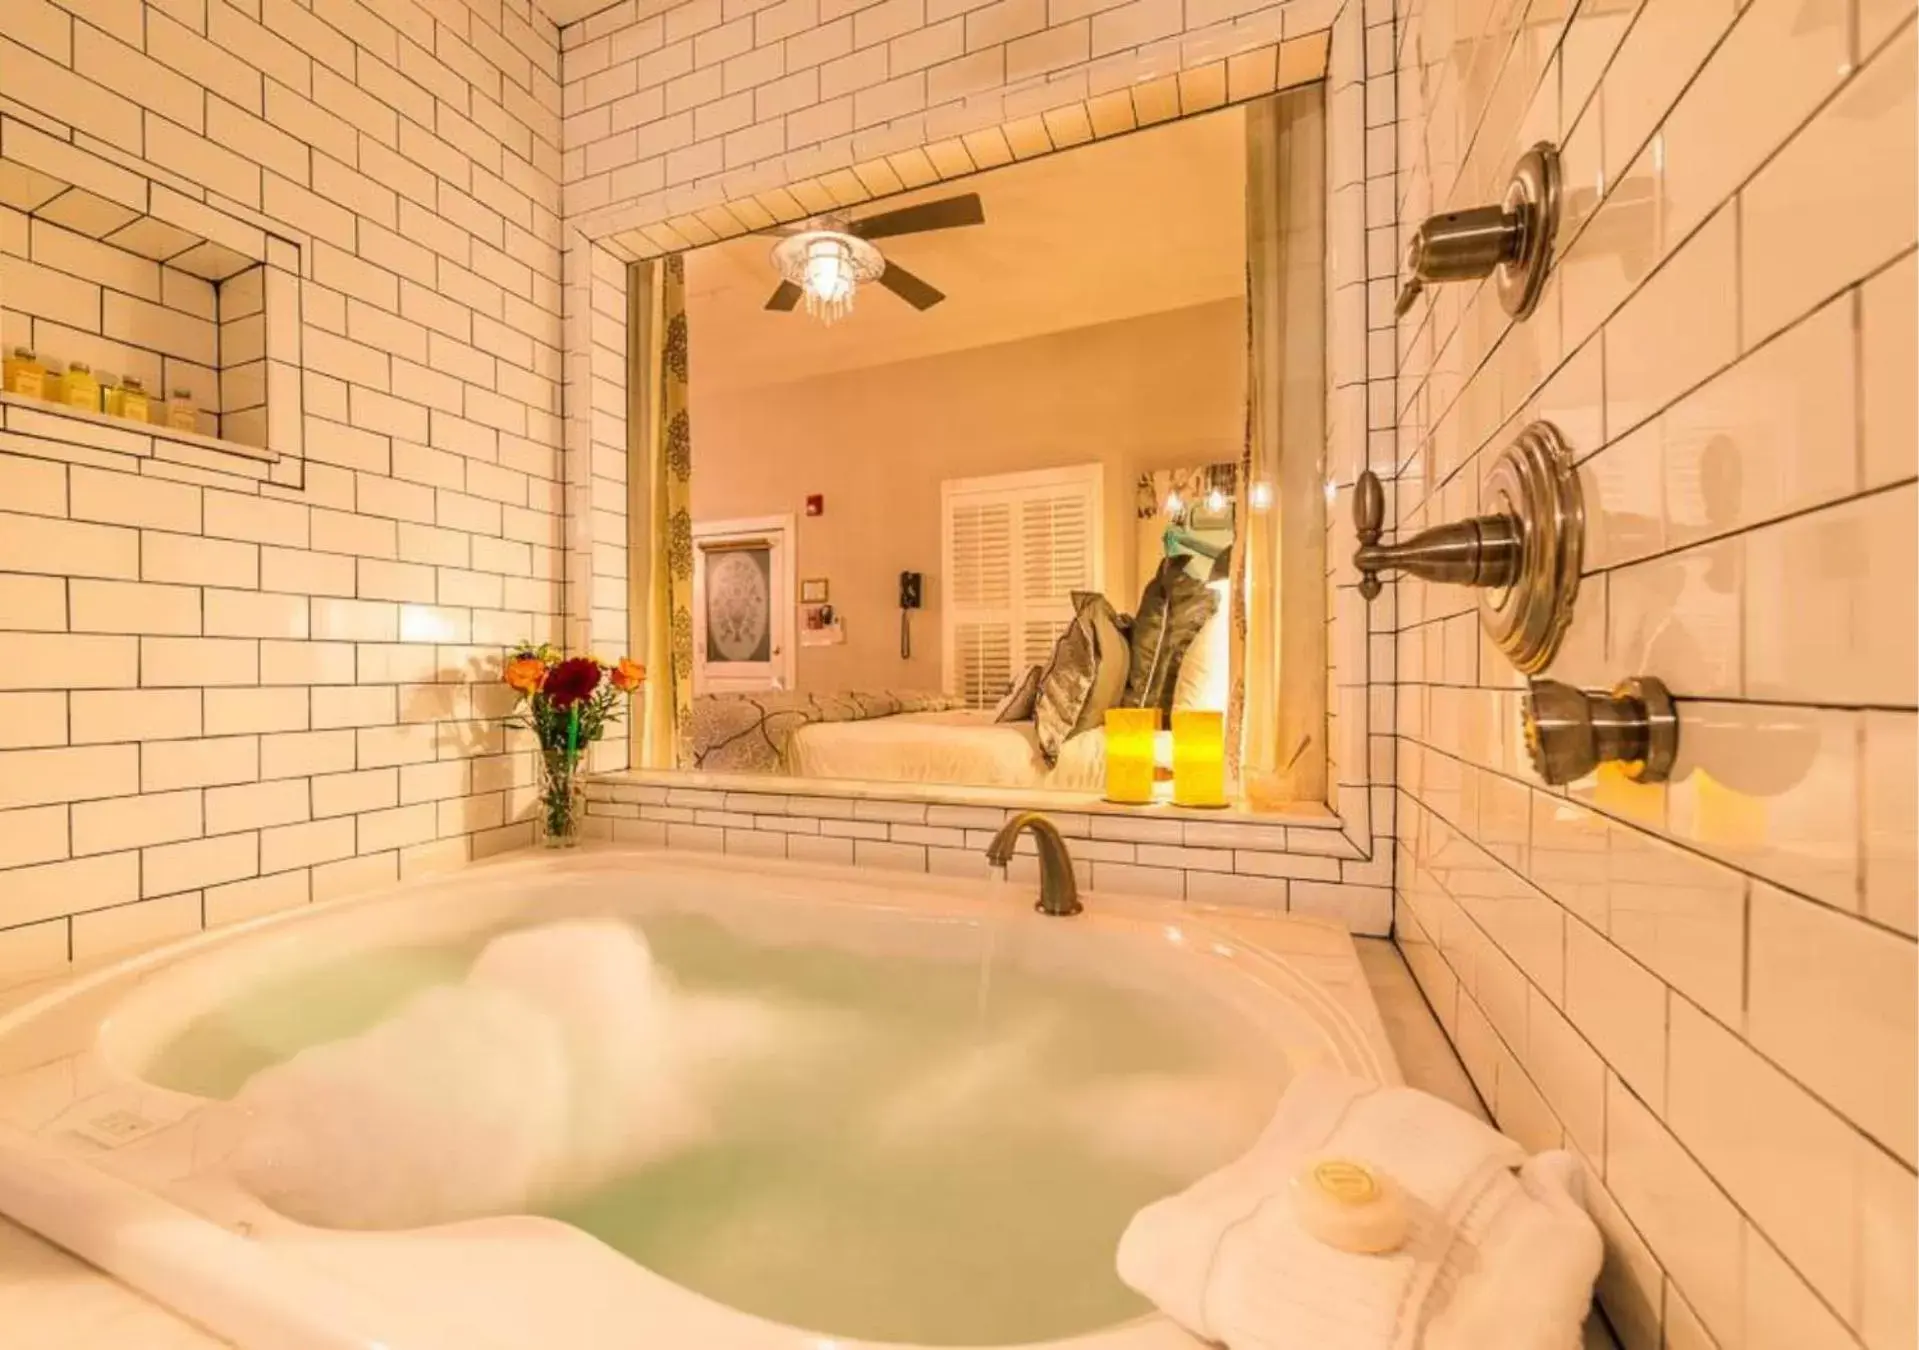 Shower, Bathroom in Carriage Way Inn Bed & Breakfast Adults Only - 21 years old and up